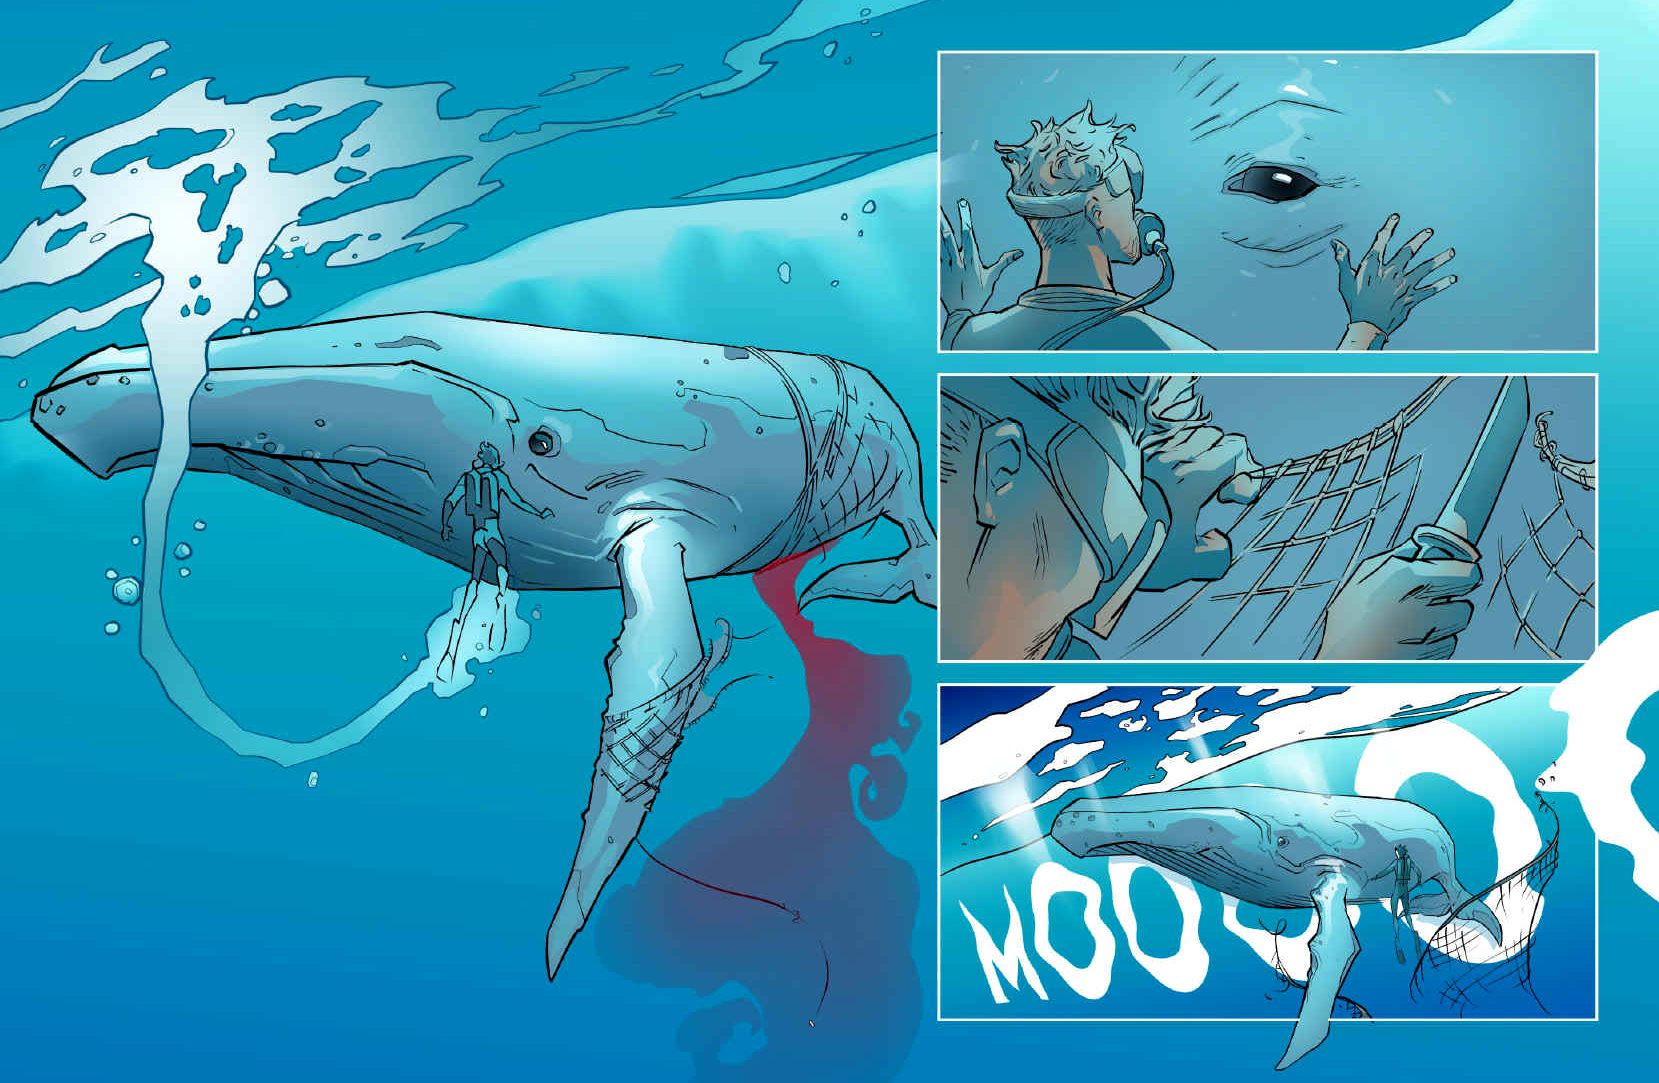 John Storm dives in to rescue Kulo Luna, and cut the giant whale free of fishing nets